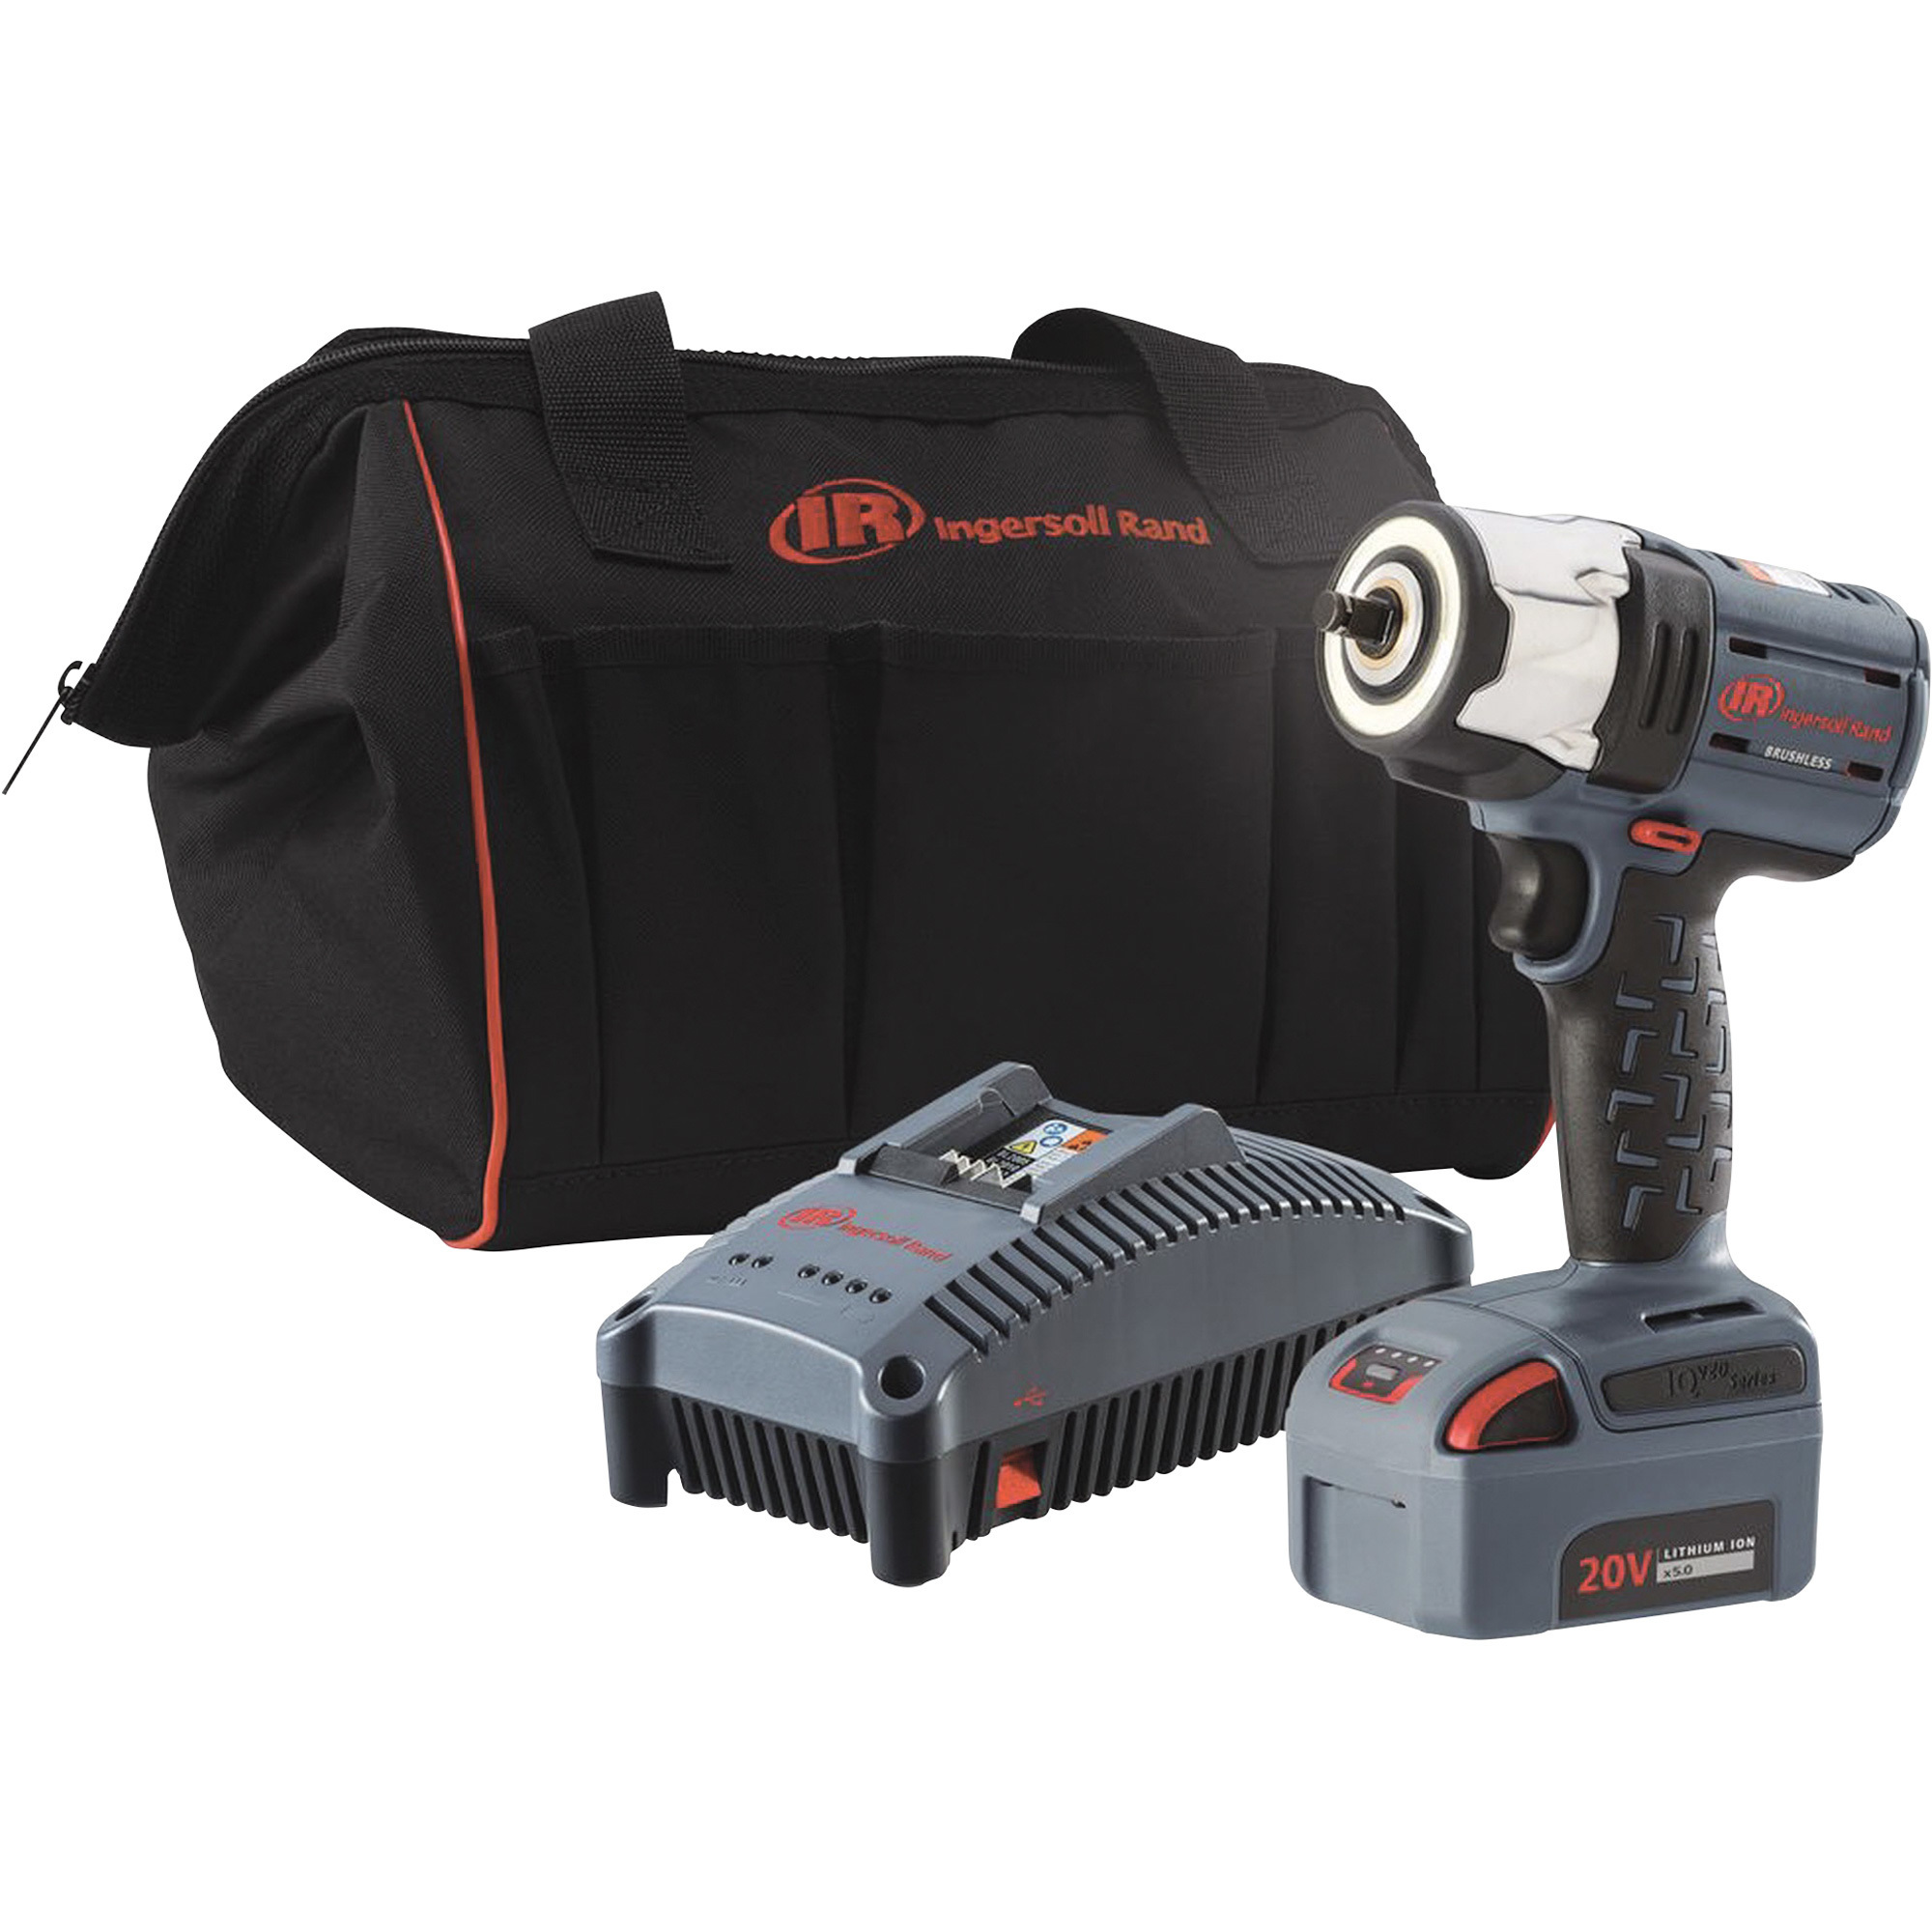 Ingersoll Rand IQV20 Series 20V Lightweight Cordless Impact Wrench Kit, 3/8Inch Drive, 550 Ft./Lbs. Torque, One Battery, Model W5132-K12